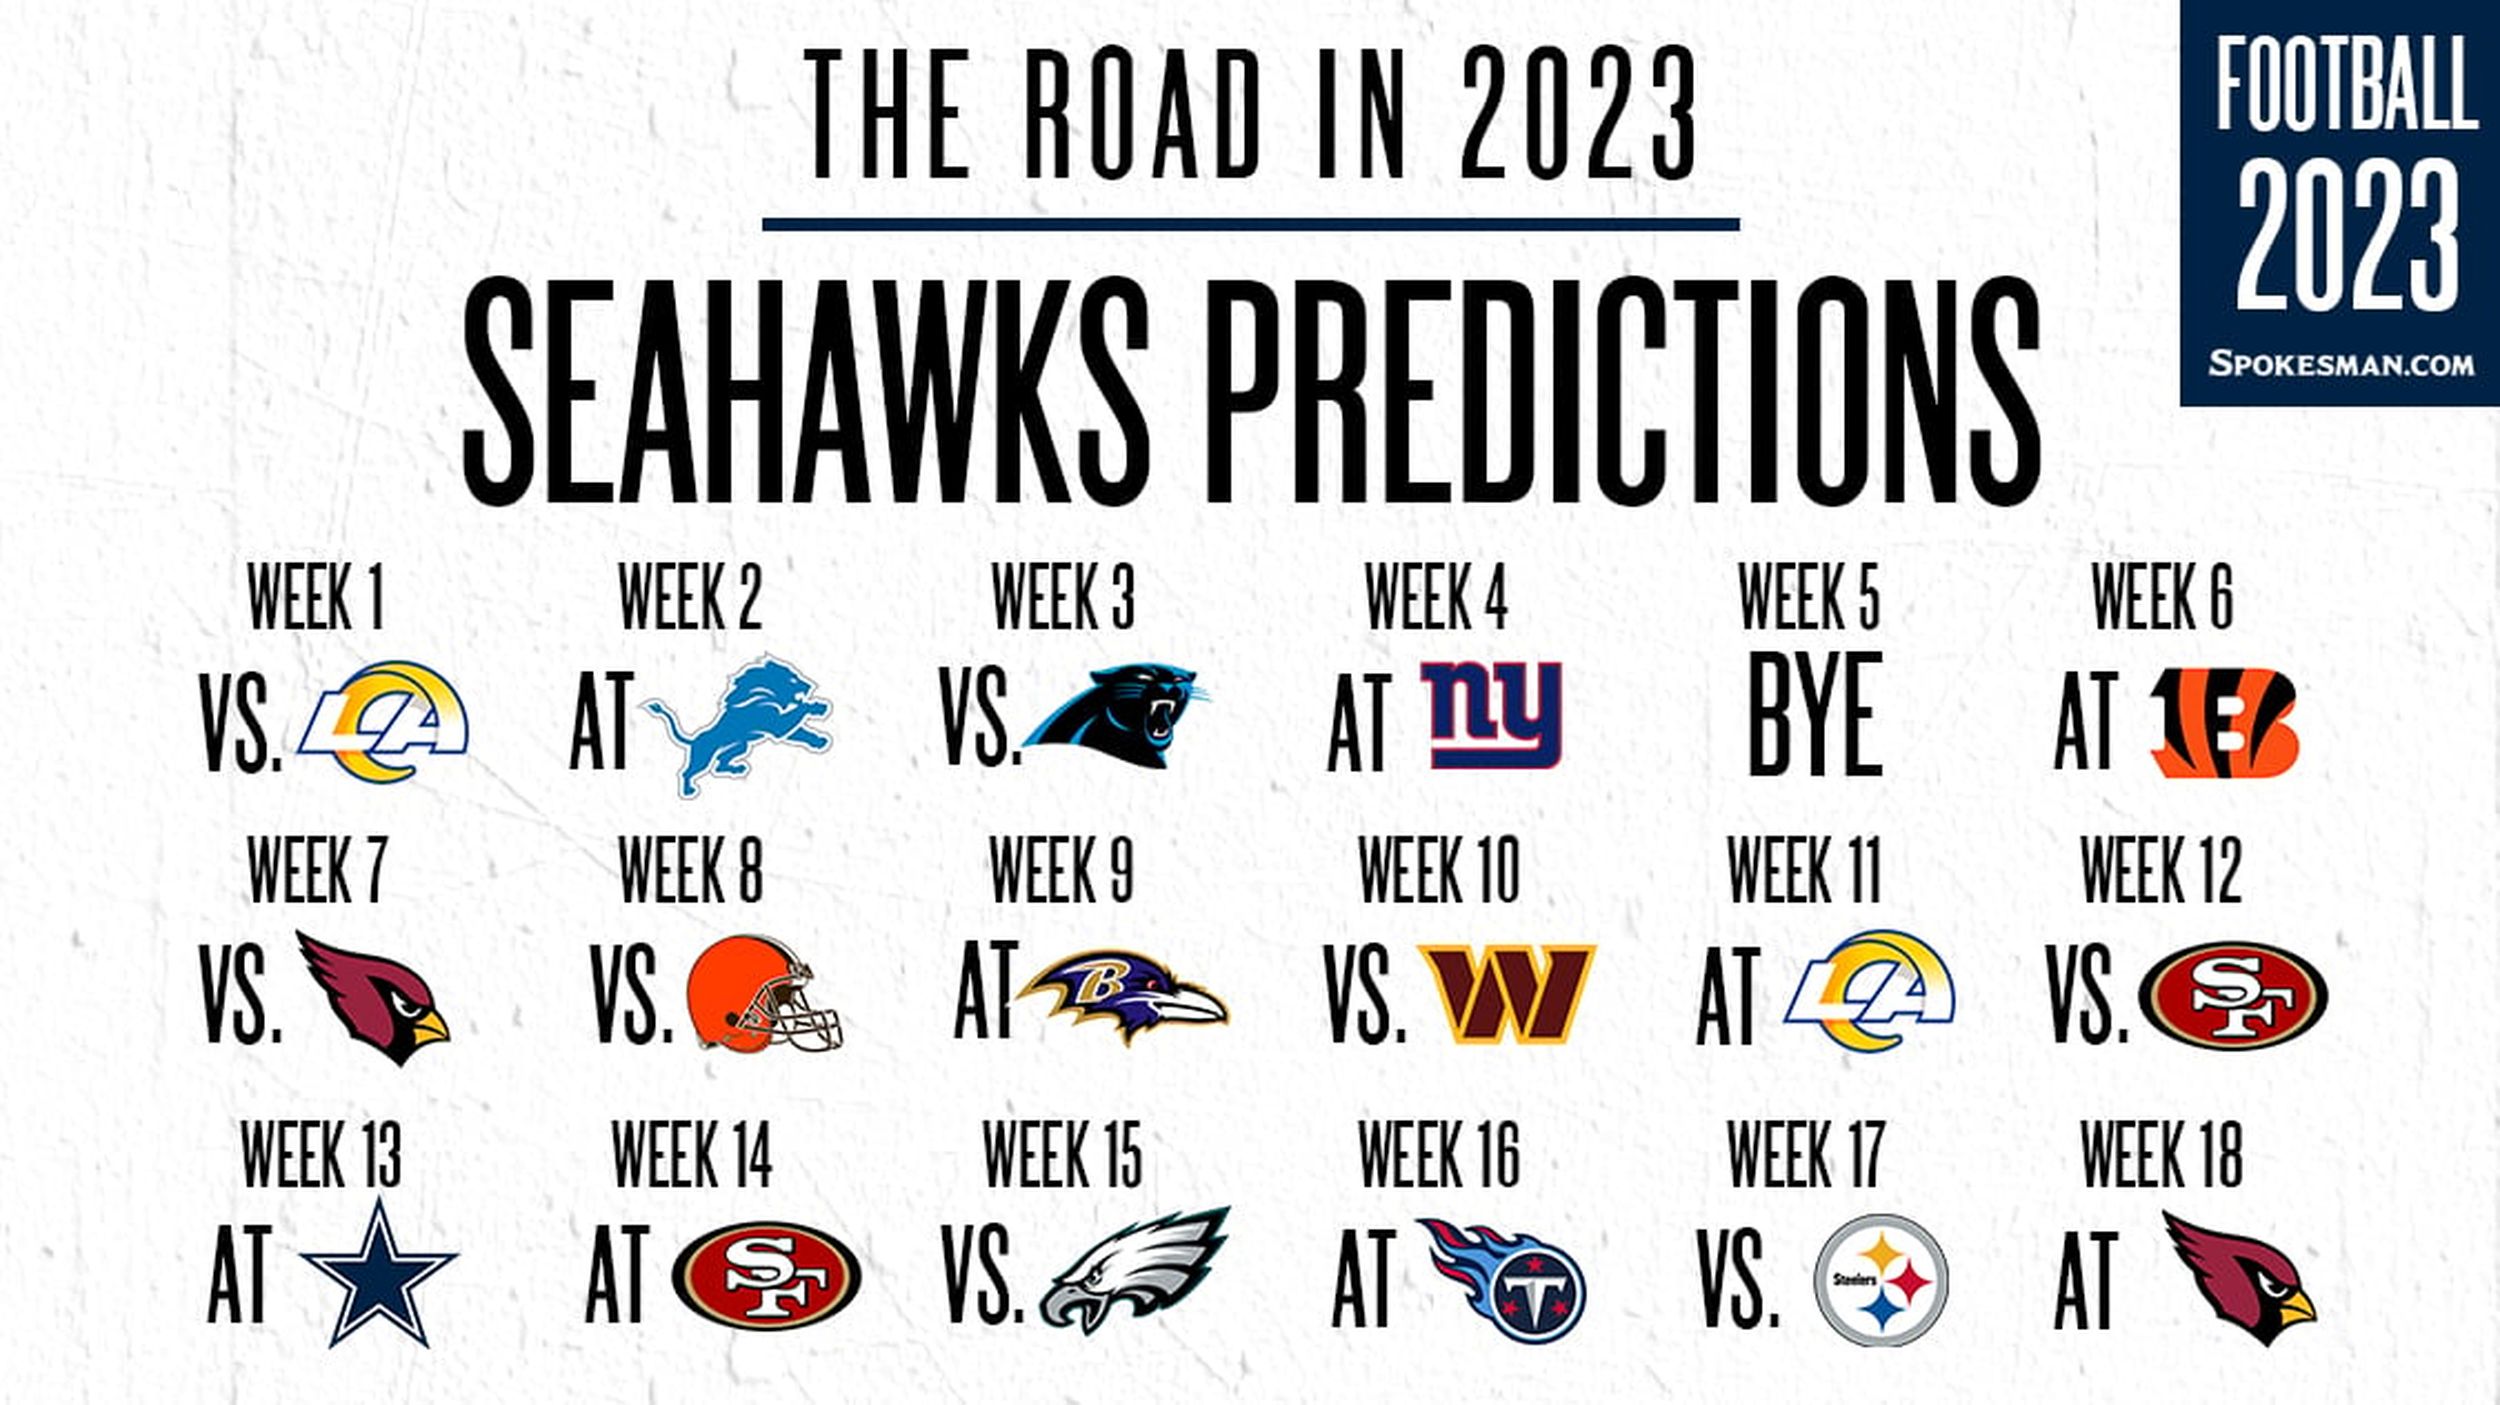 Seattle's road in 2023: Tough stretch to close season, but Seahawks should  have enough for playoff berth